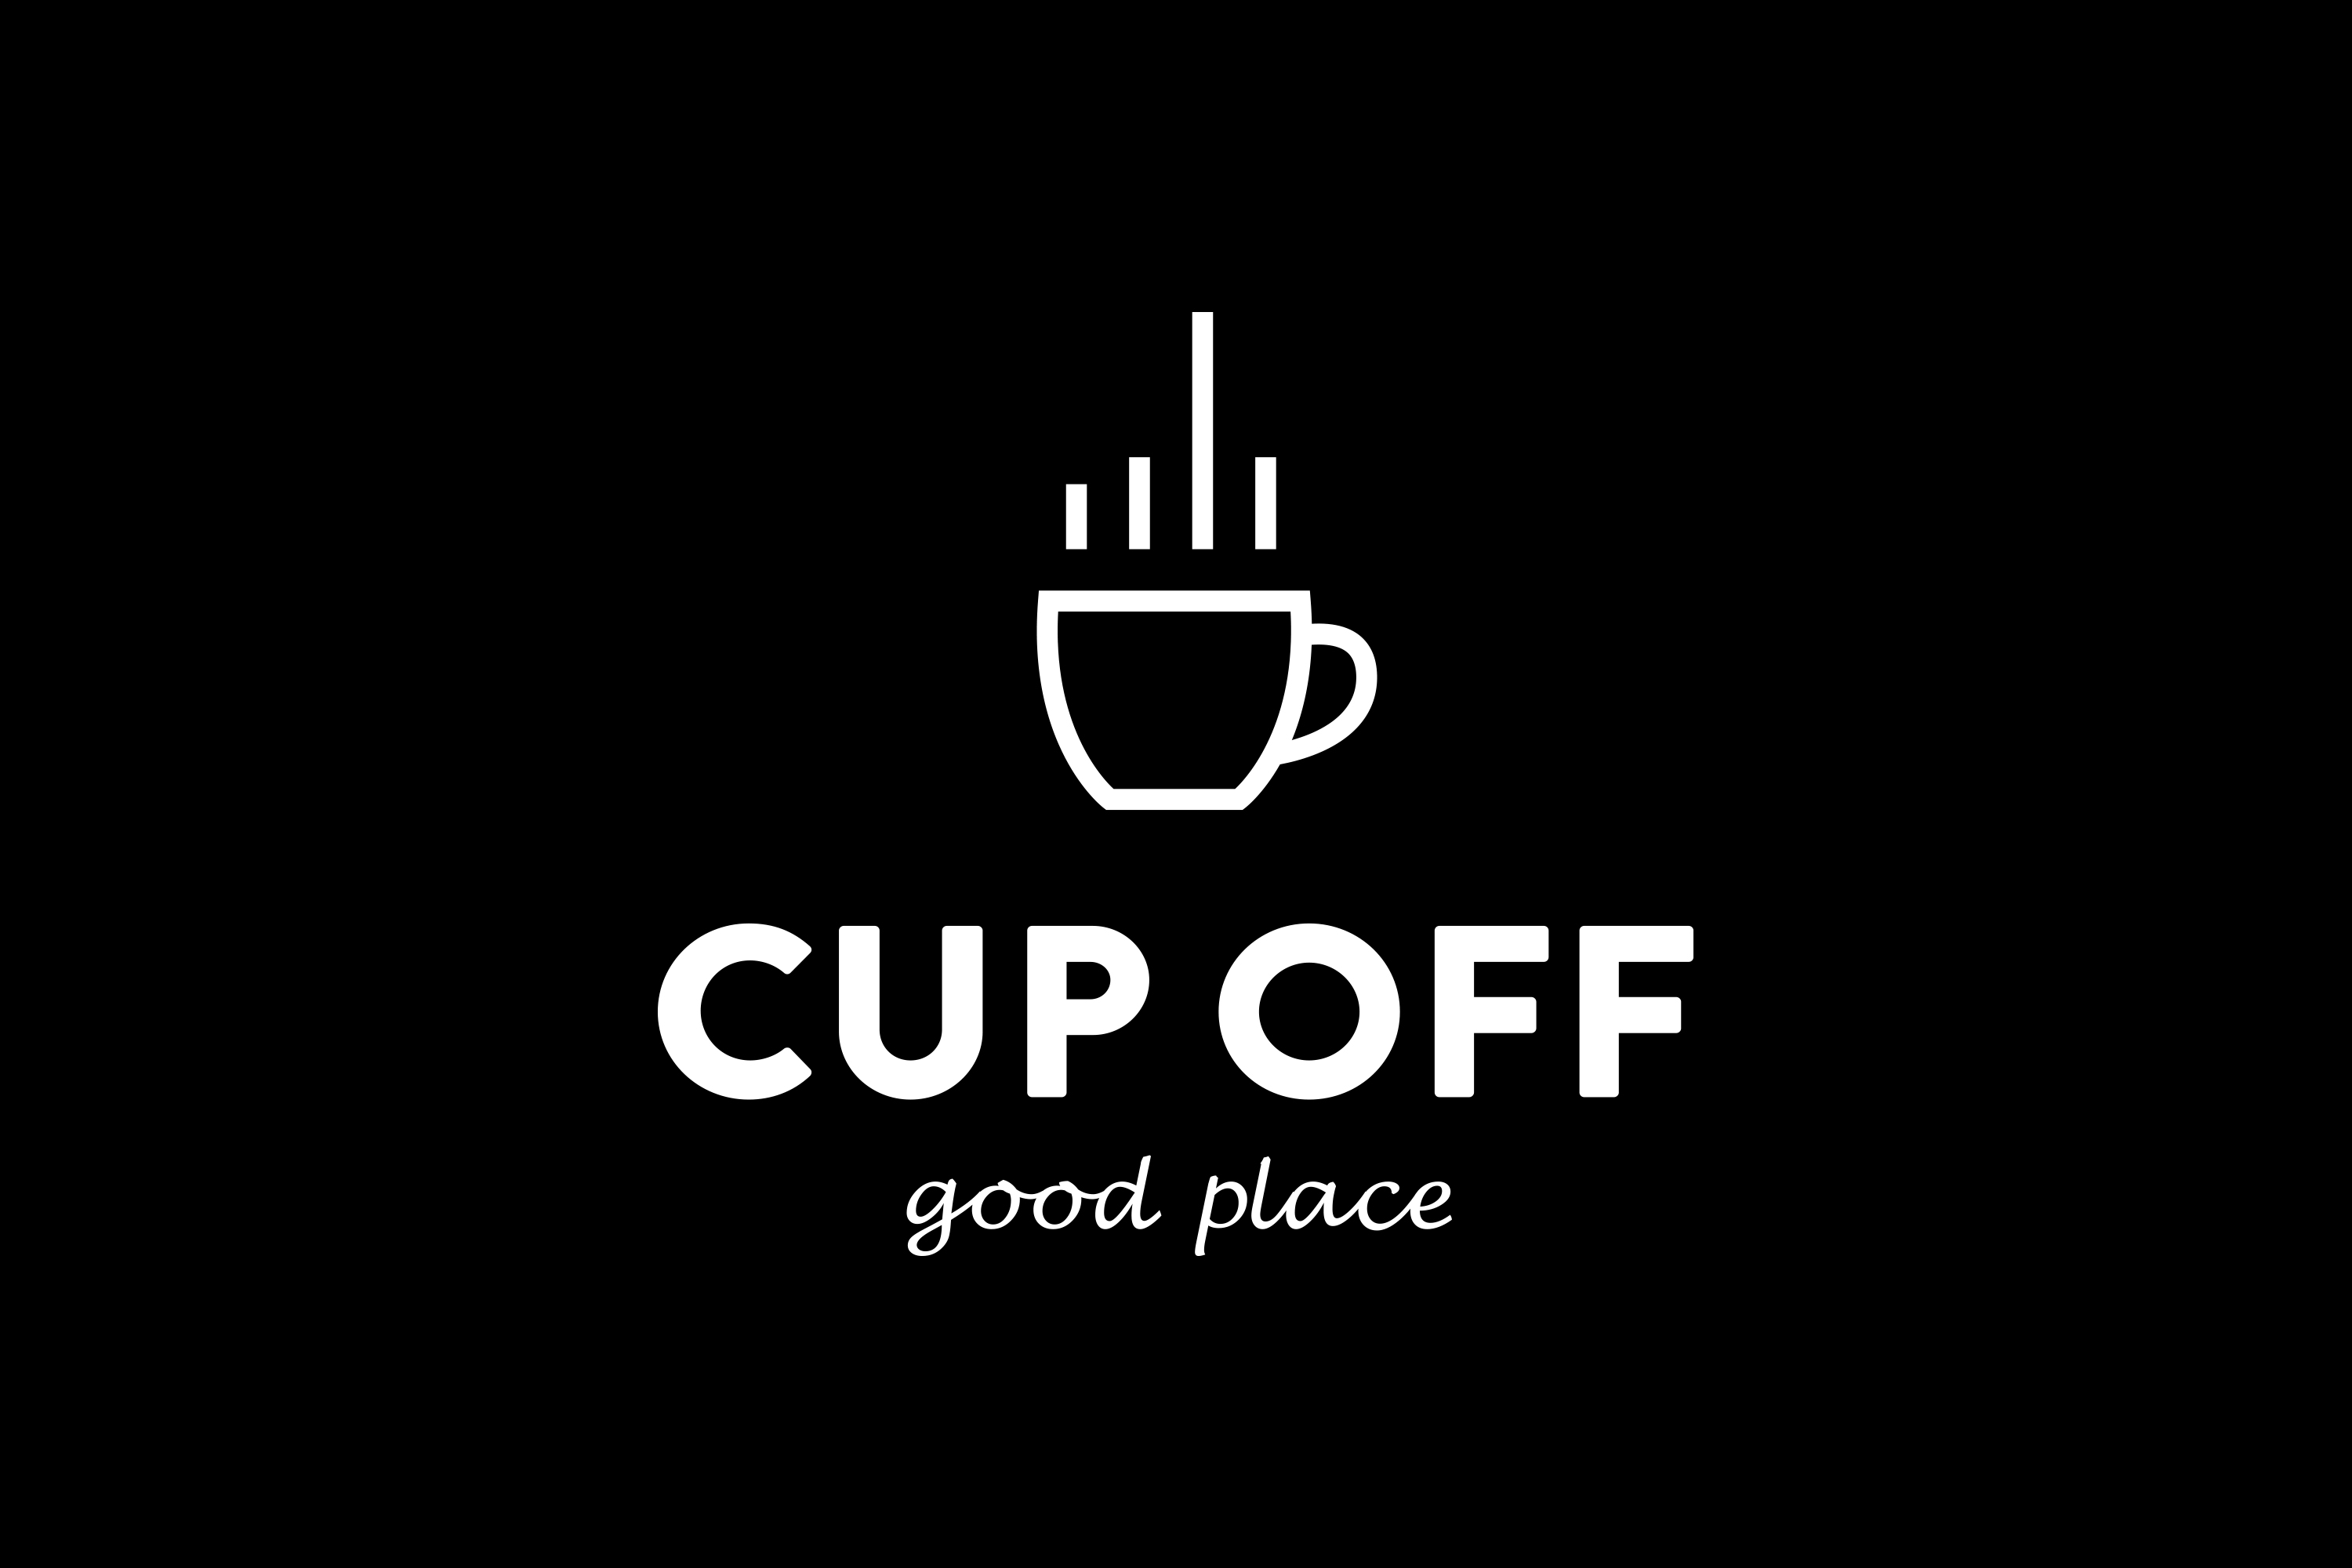 CUP OFF